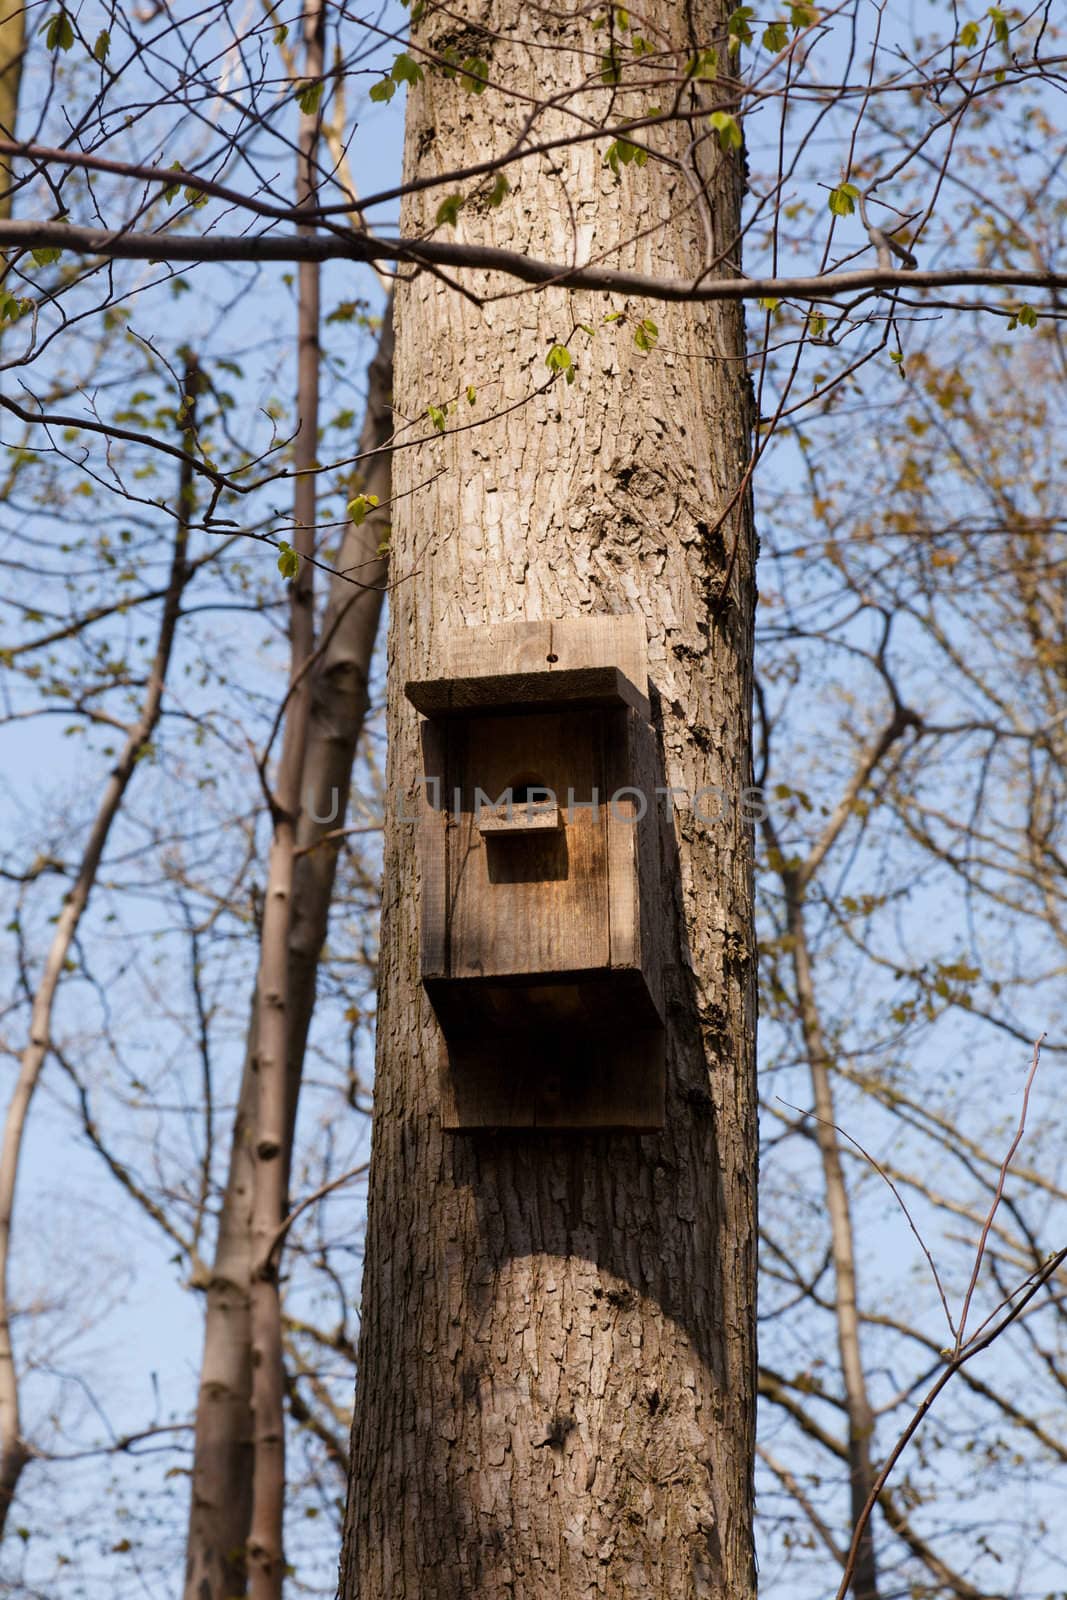 Nest box on a tree in a public park.